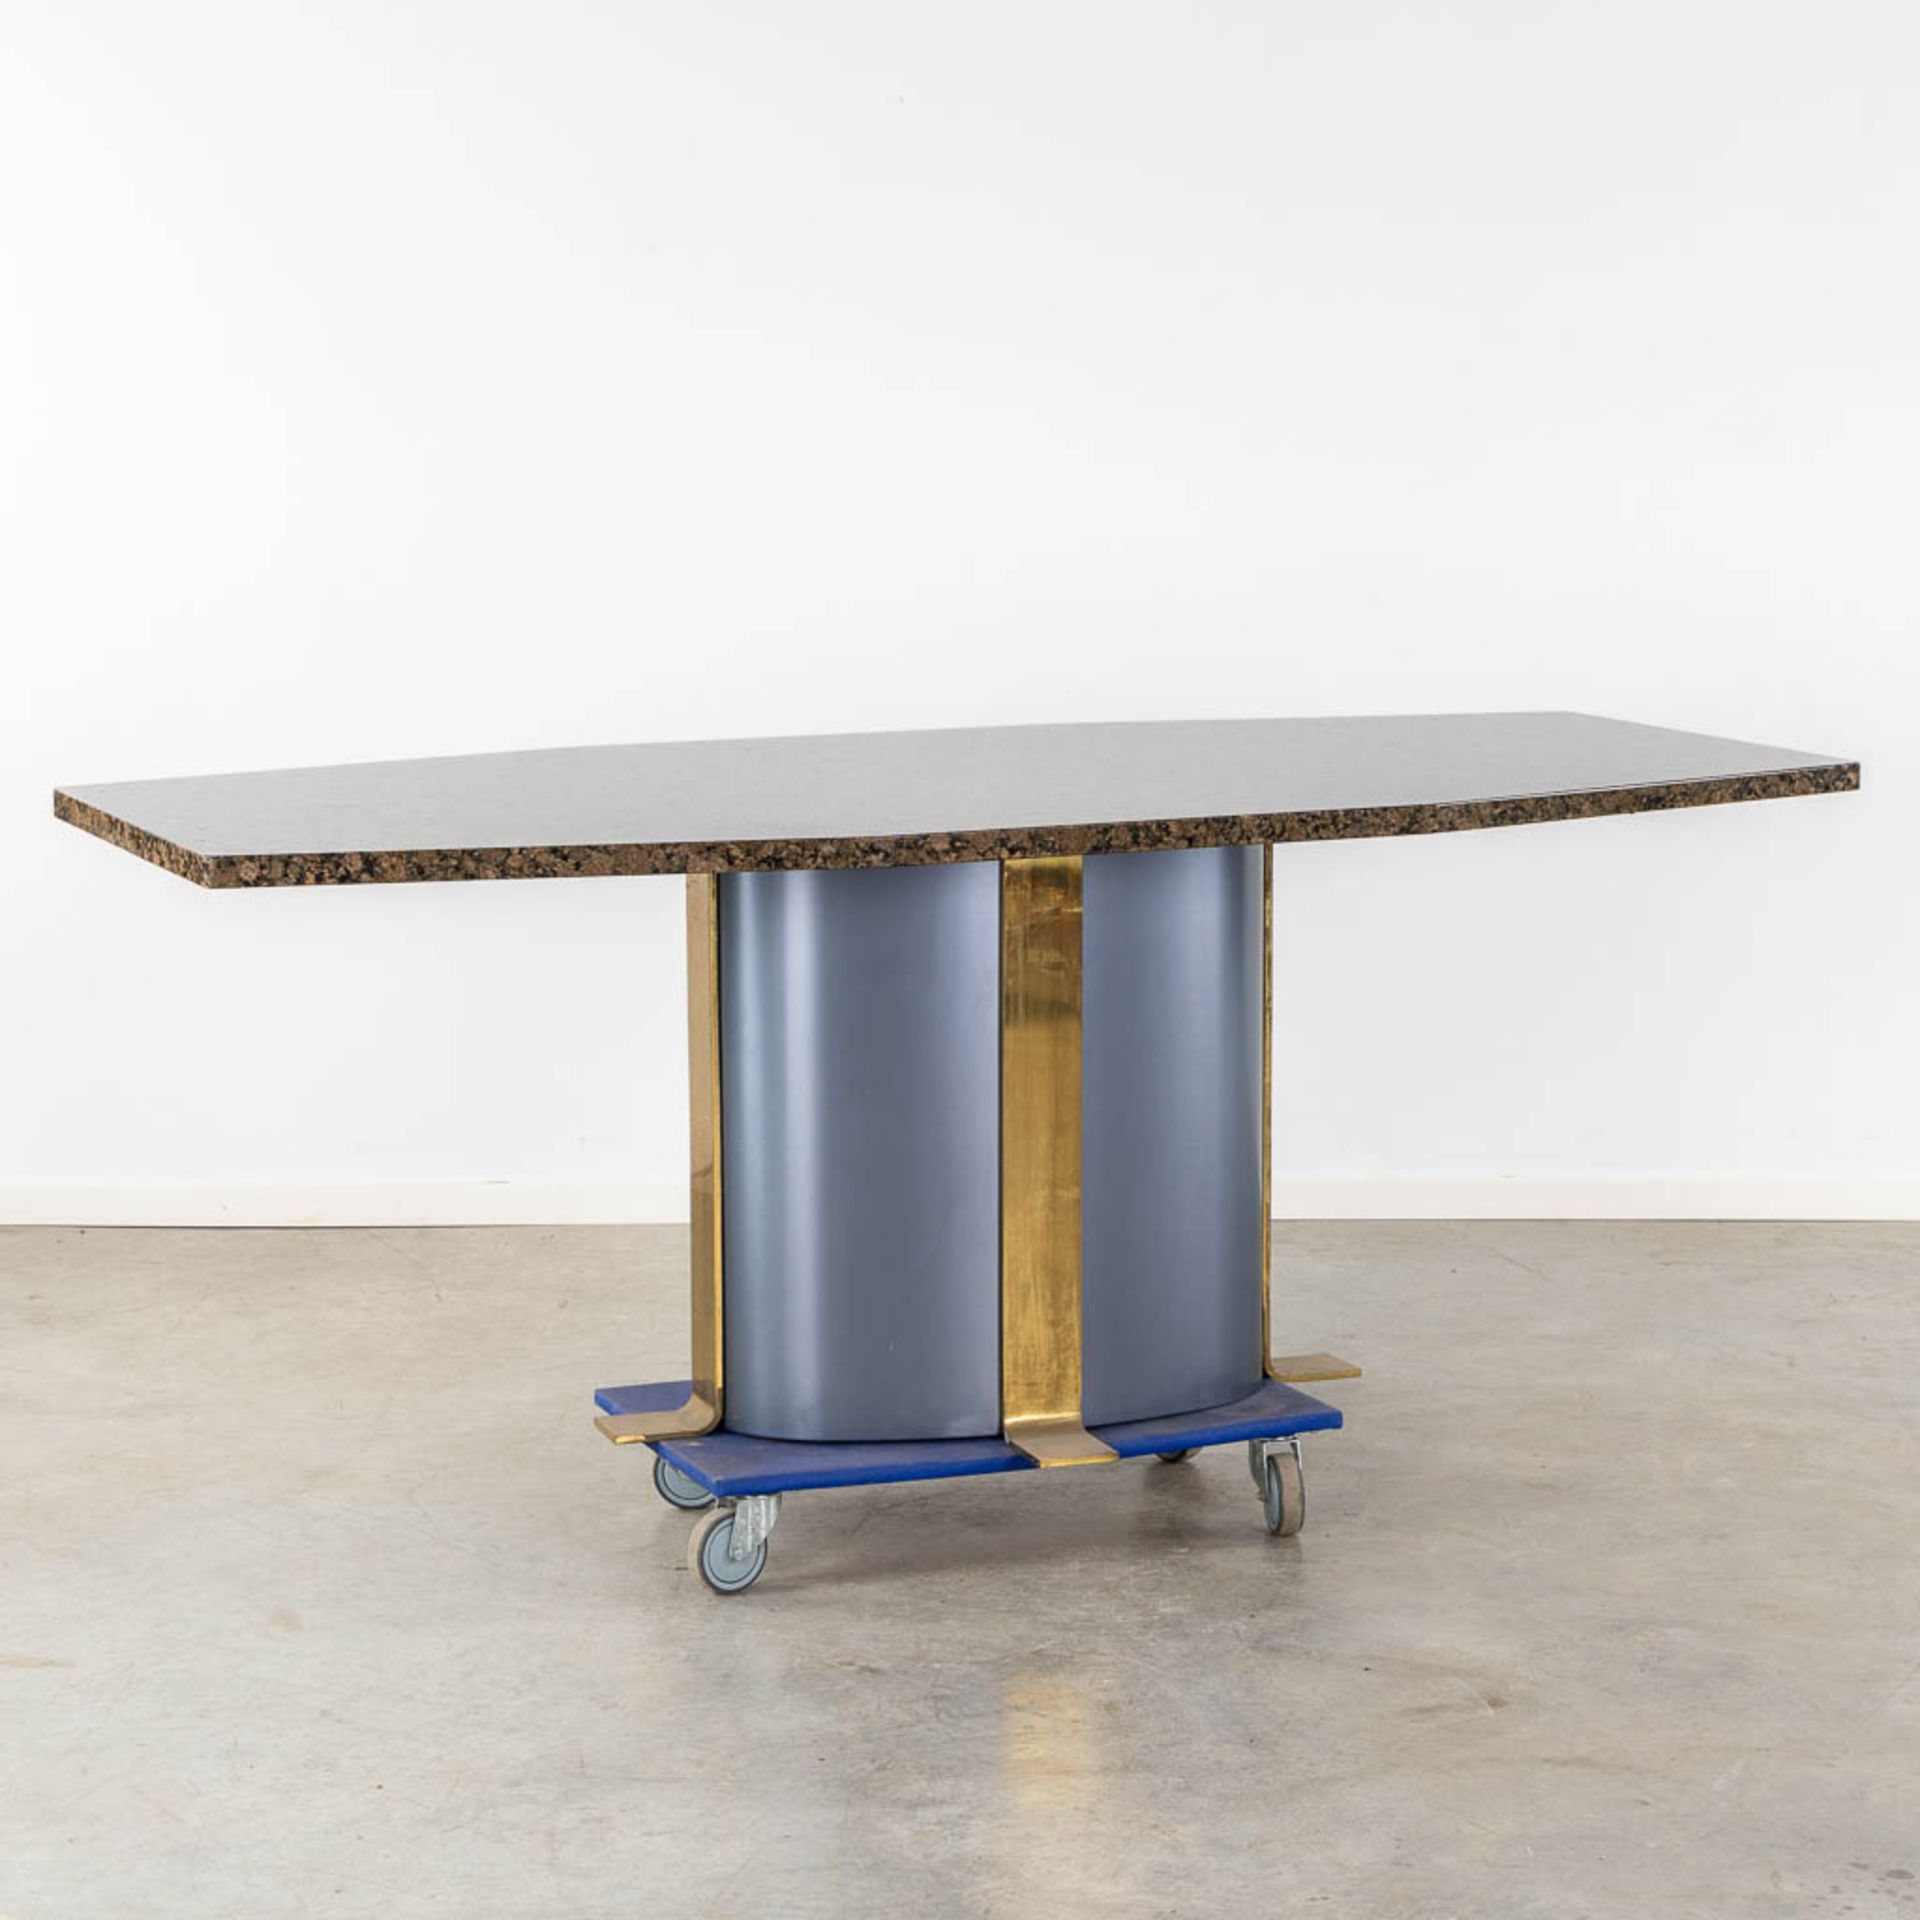 A diningroom table, bronze and patinated metal with a granite table top. (L:101 x W:210 x H:79 cm) - Bild 3 aus 10